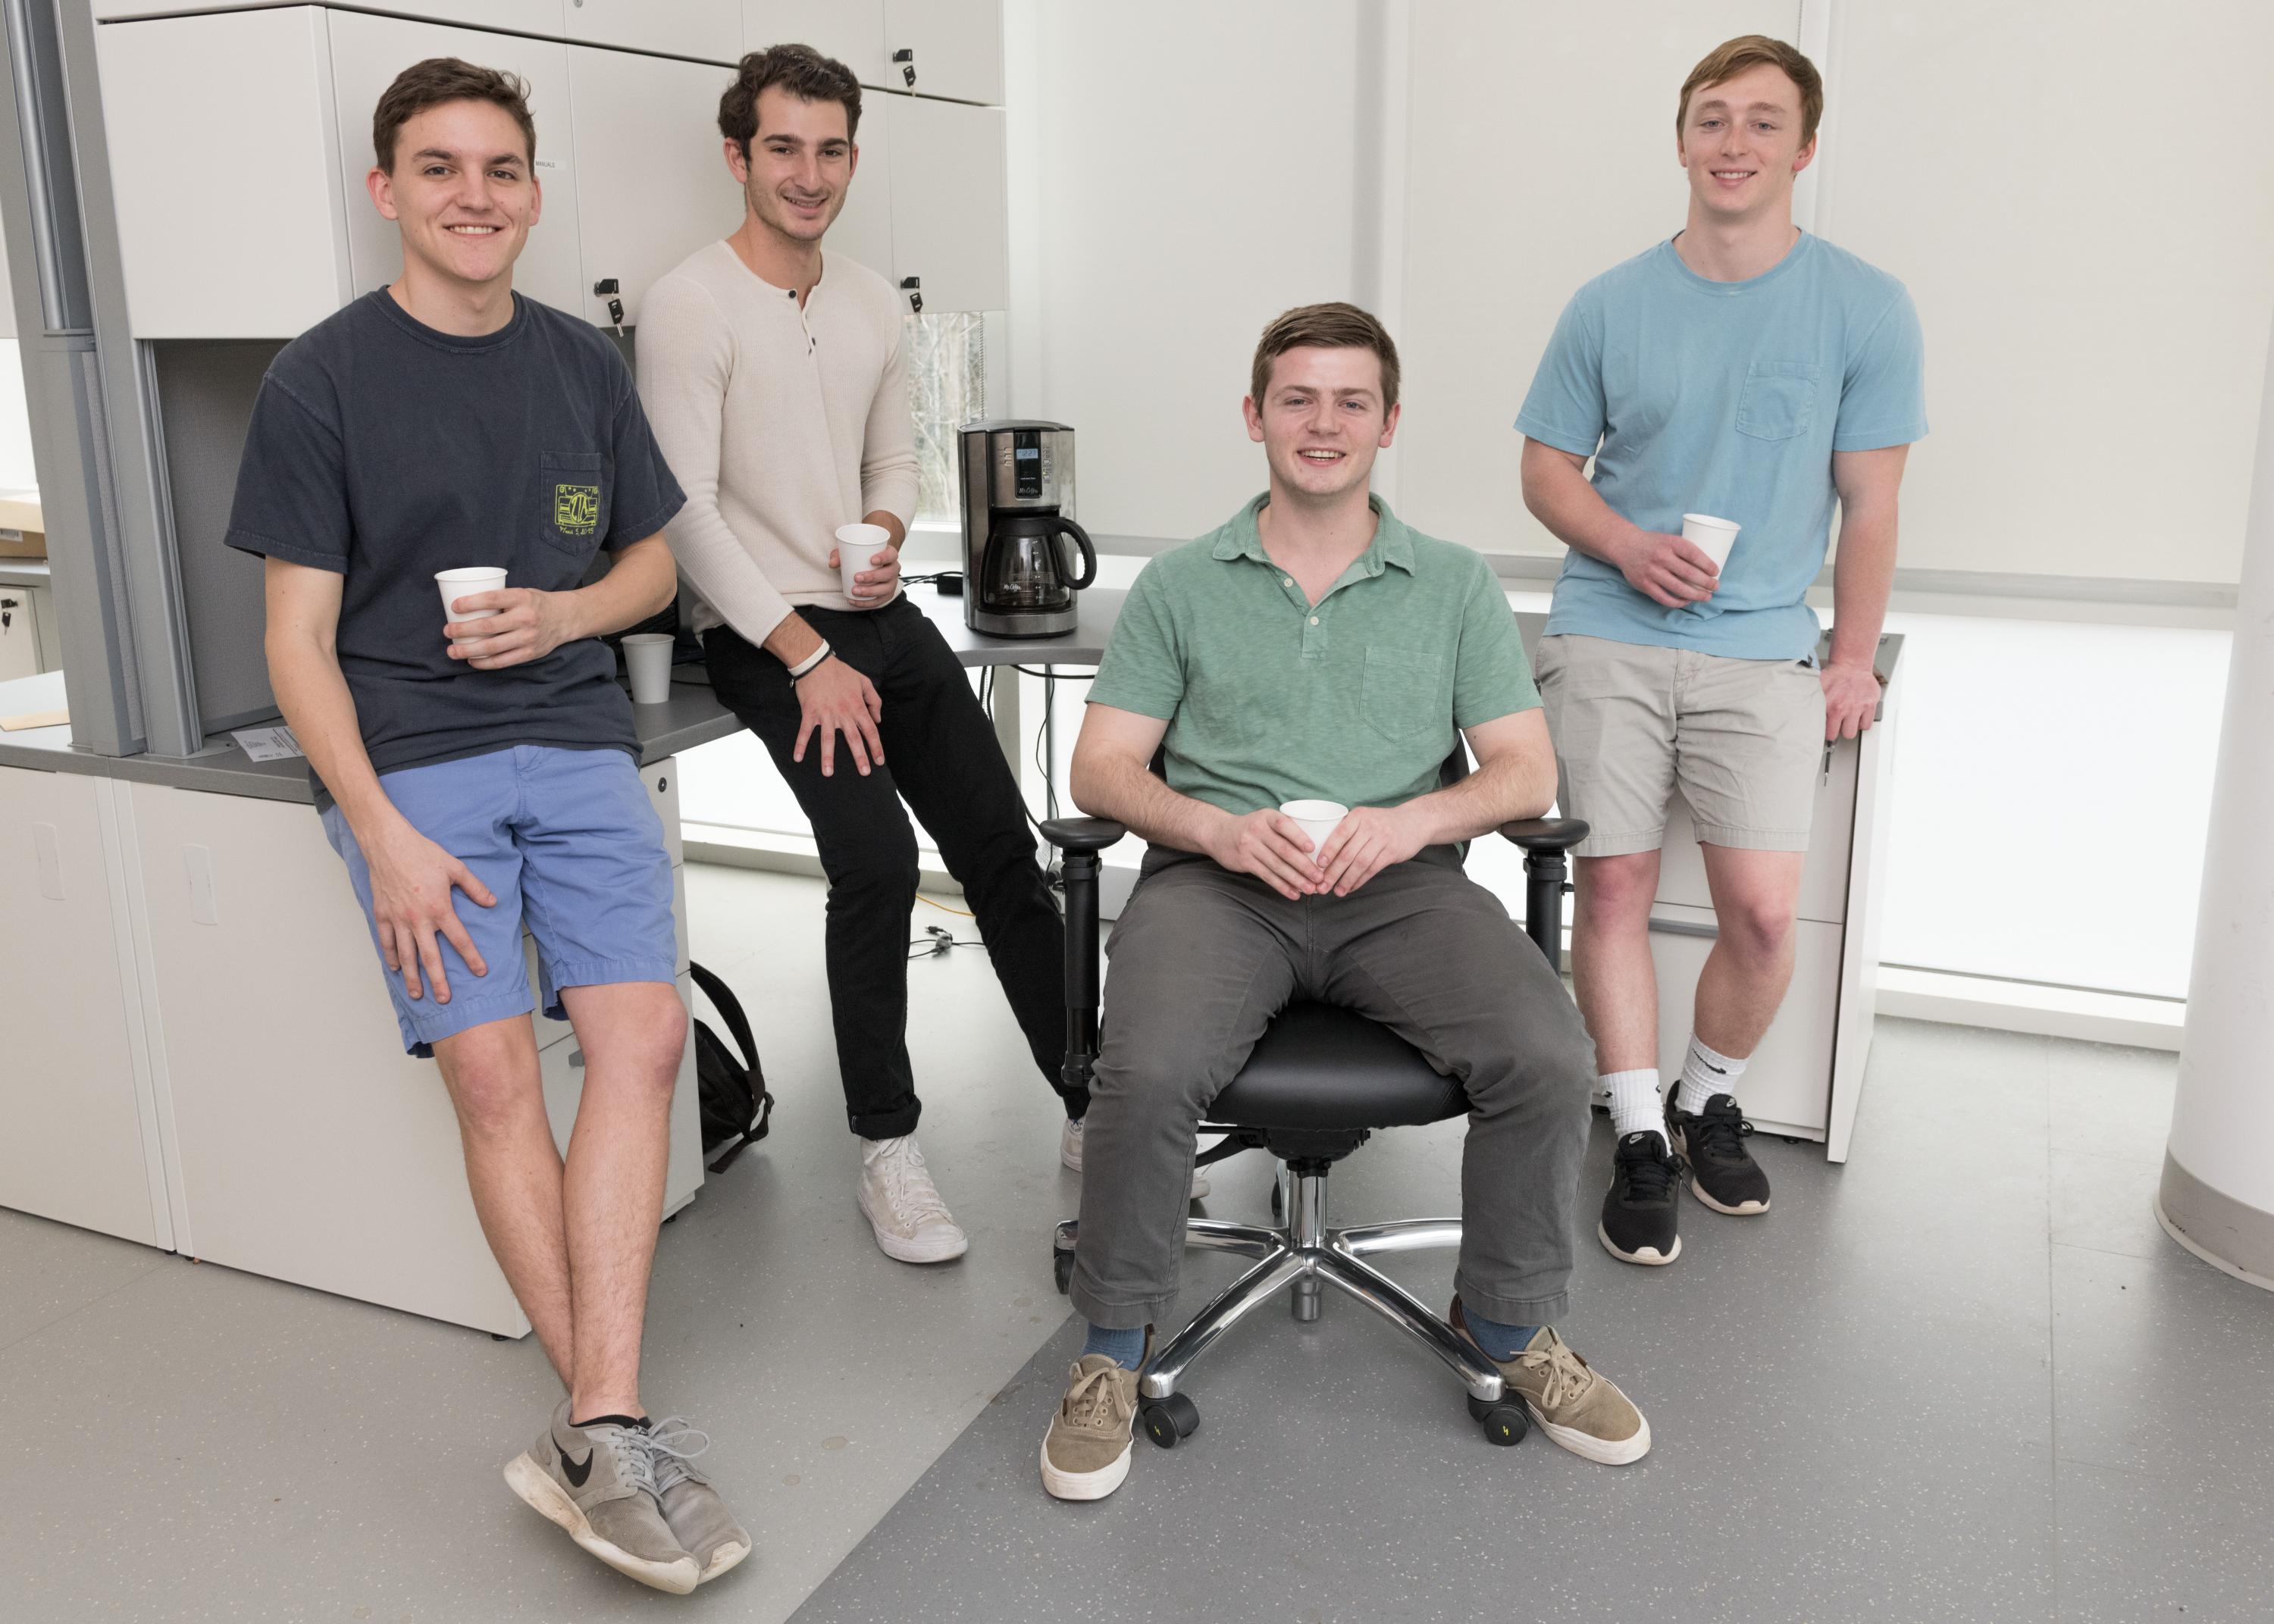 InVenture Prize finalist pHAM designed new filters to reduce coffee’s acidity. The inventors are four materials science and engineering majors: Aaron Stansell, Michele Lauto, Tyler Quill and Lucas Votaw. (Photo by Allison Carter)